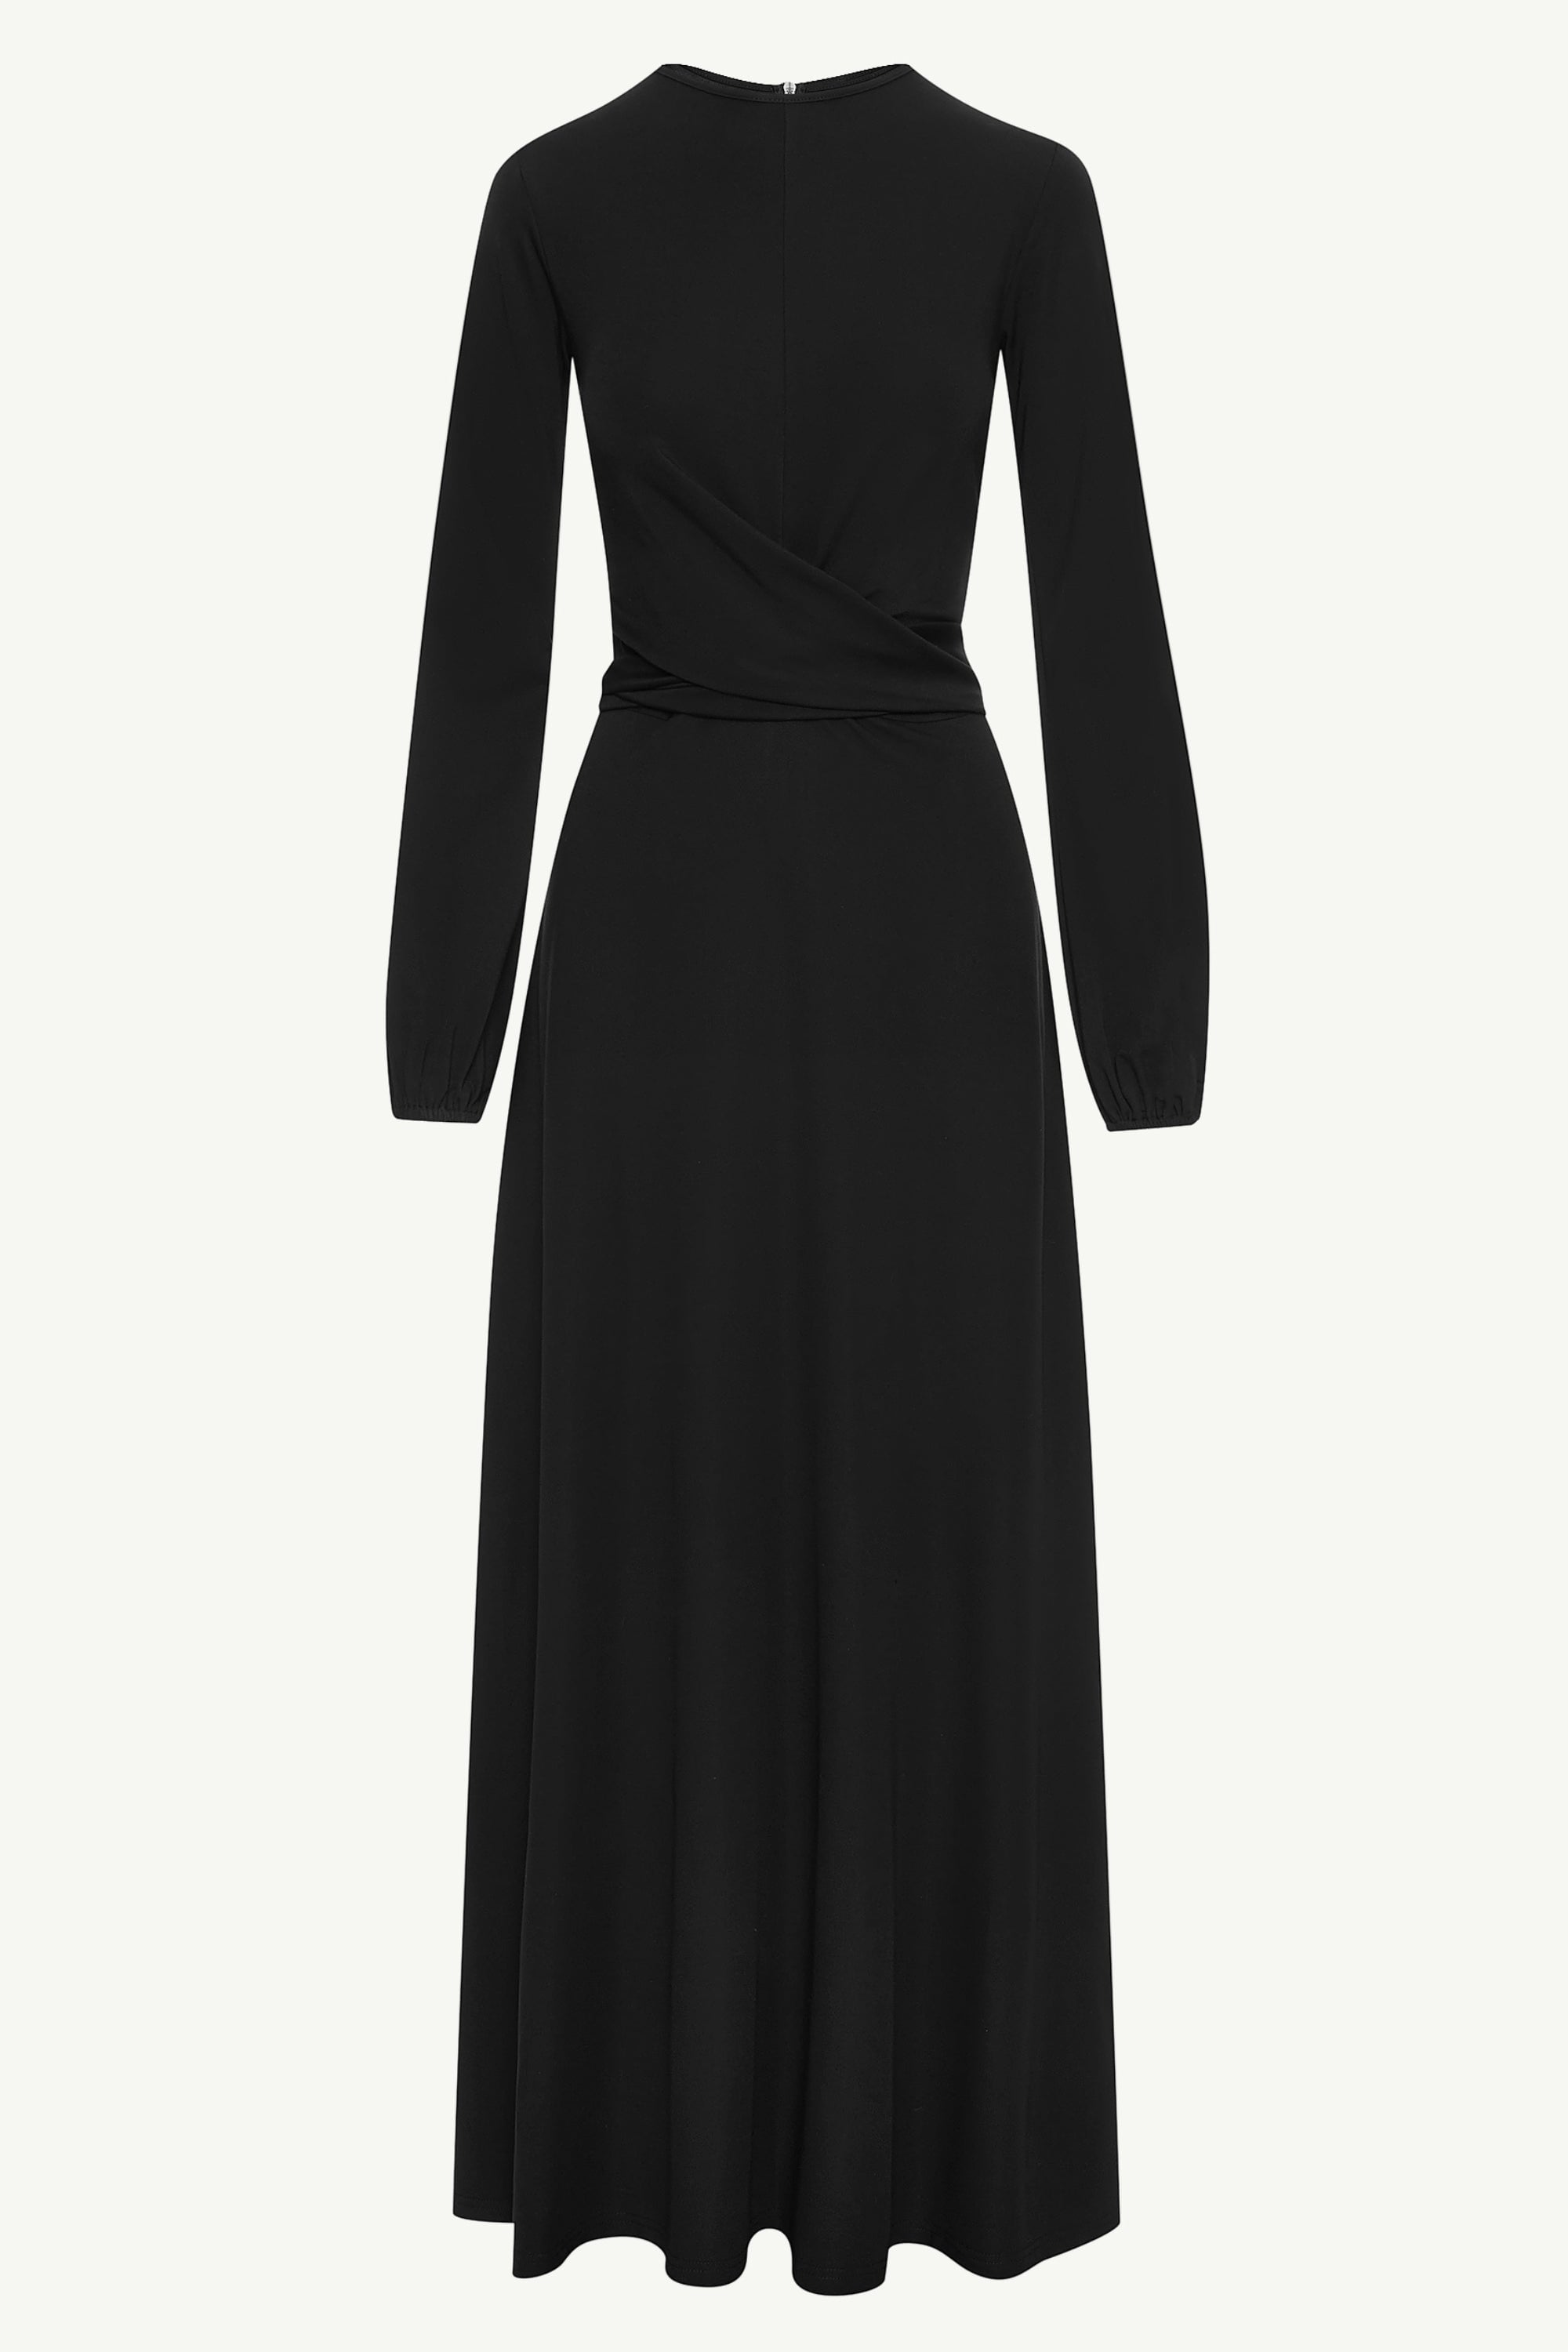 Veiled  Modest Maxi Dresses for Women – Page 3